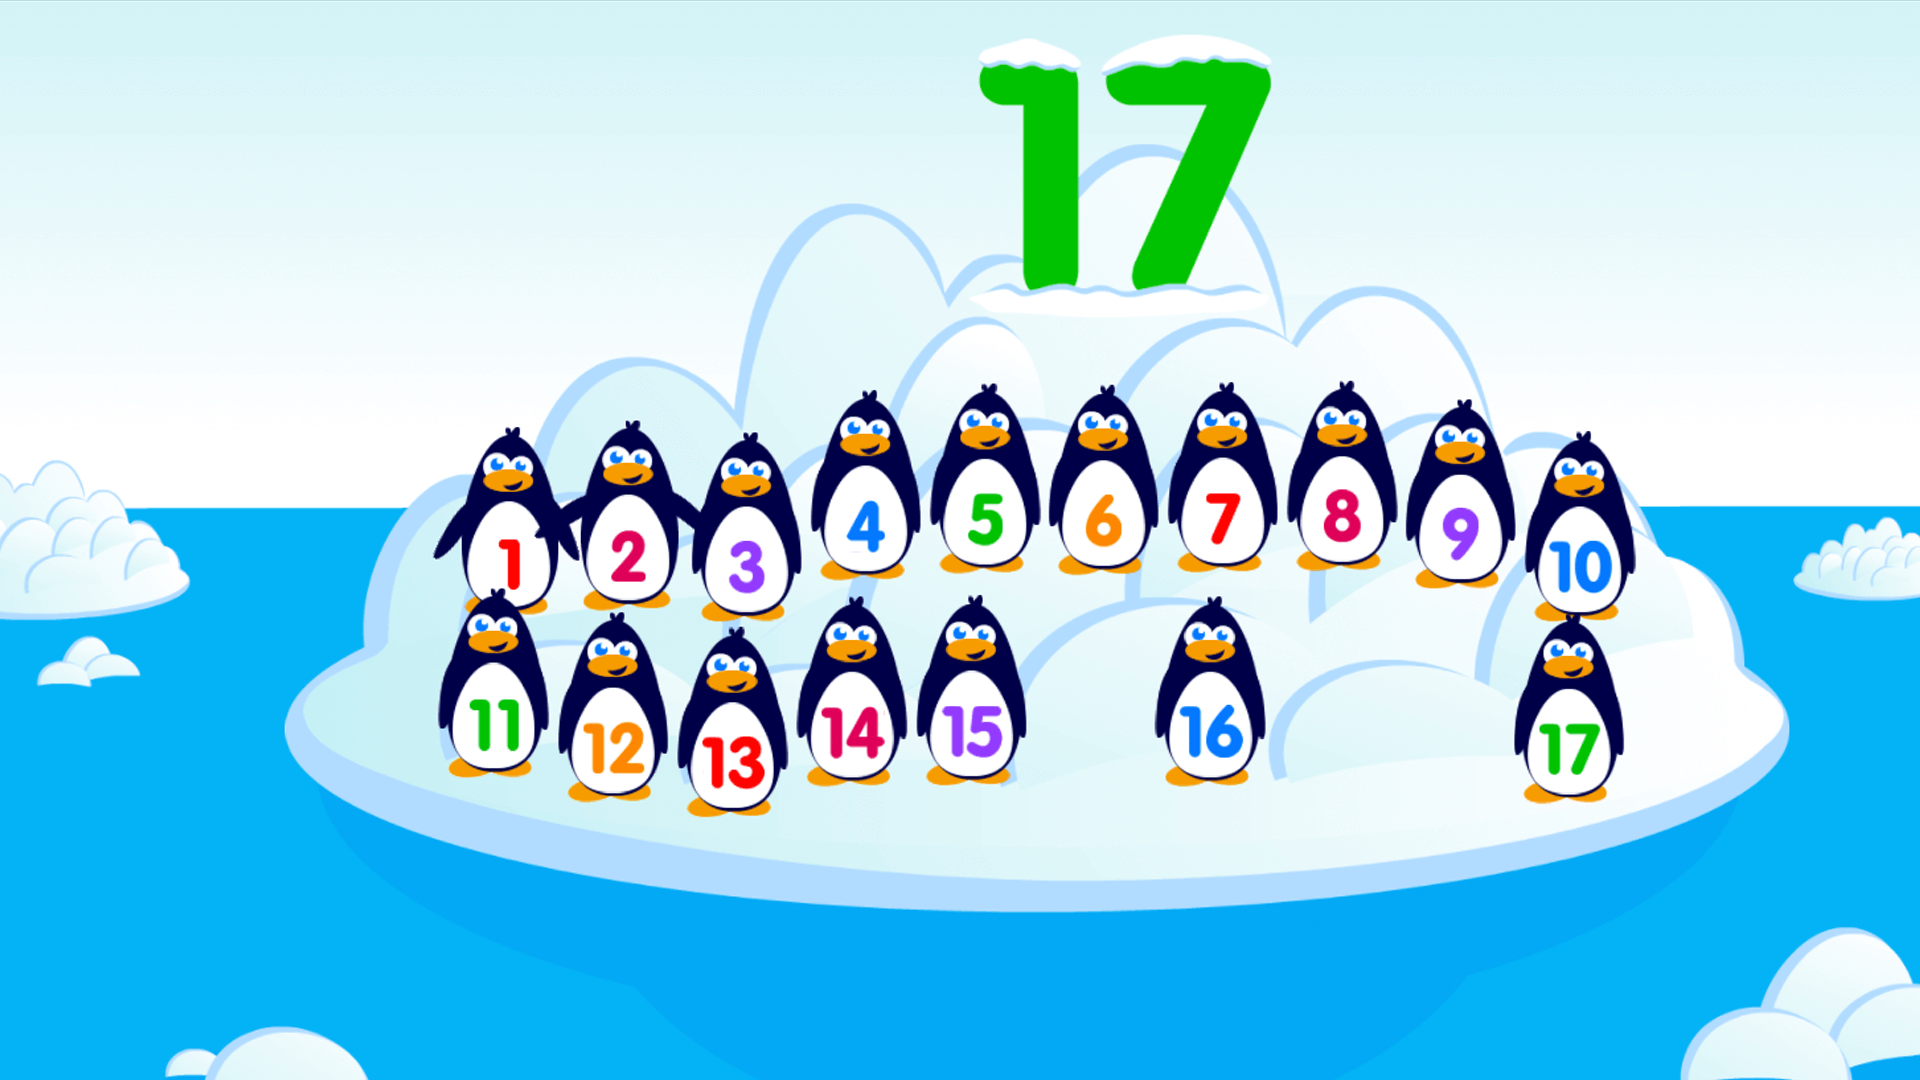 learn numbers, learn counting, game for baby, game for toddlers, penguins, walrus